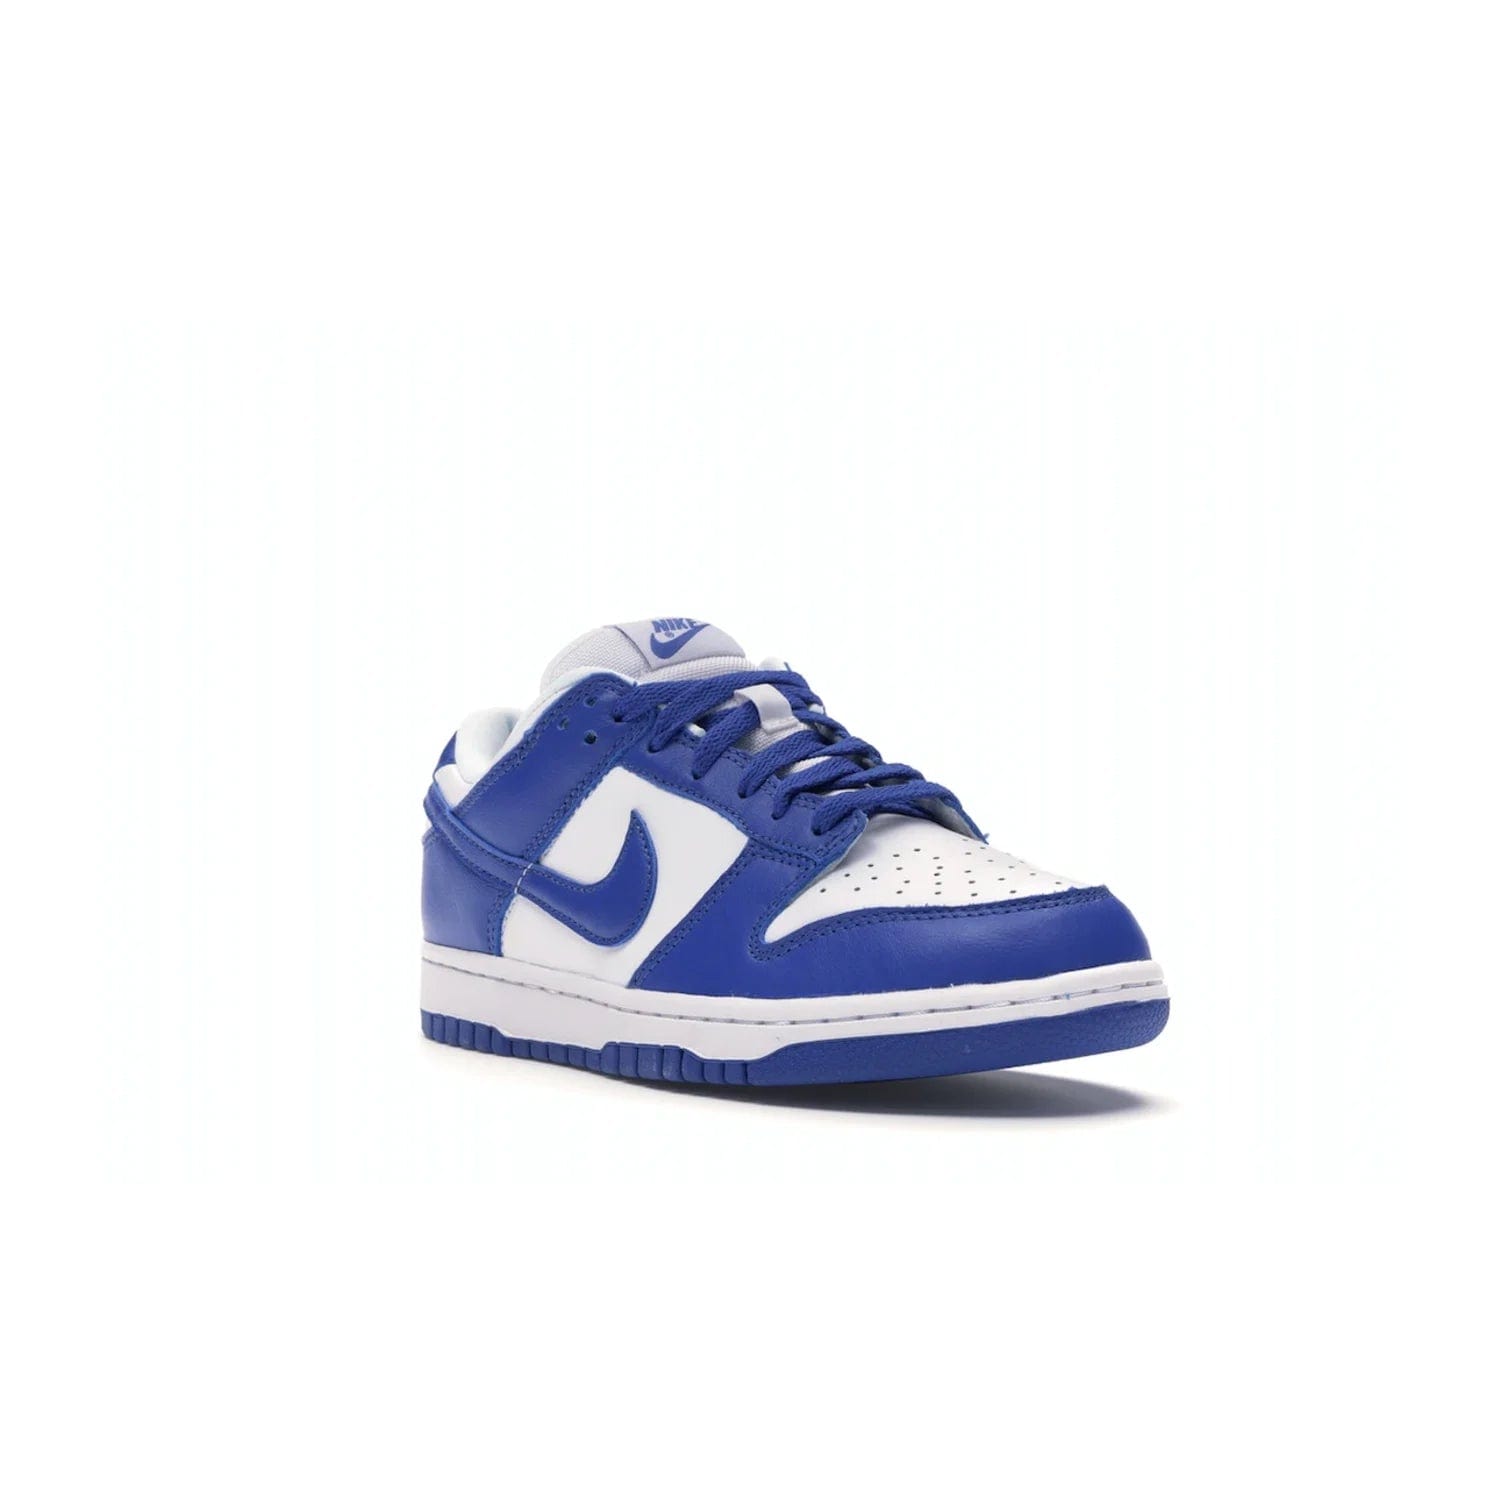 Nike Dunk Low SP Kentucky (2020/2022) - Image 6 - Only at www.BallersClubKickz.com - Classic Nike Dunk Low SP Kentucky with timeless White/Varsity Royal colorway. White leather upper, royal outsole, and Nike branding. A hit since March 2020 homage to the 1985 Nike College Colors program. Show your support with these classic kicks.